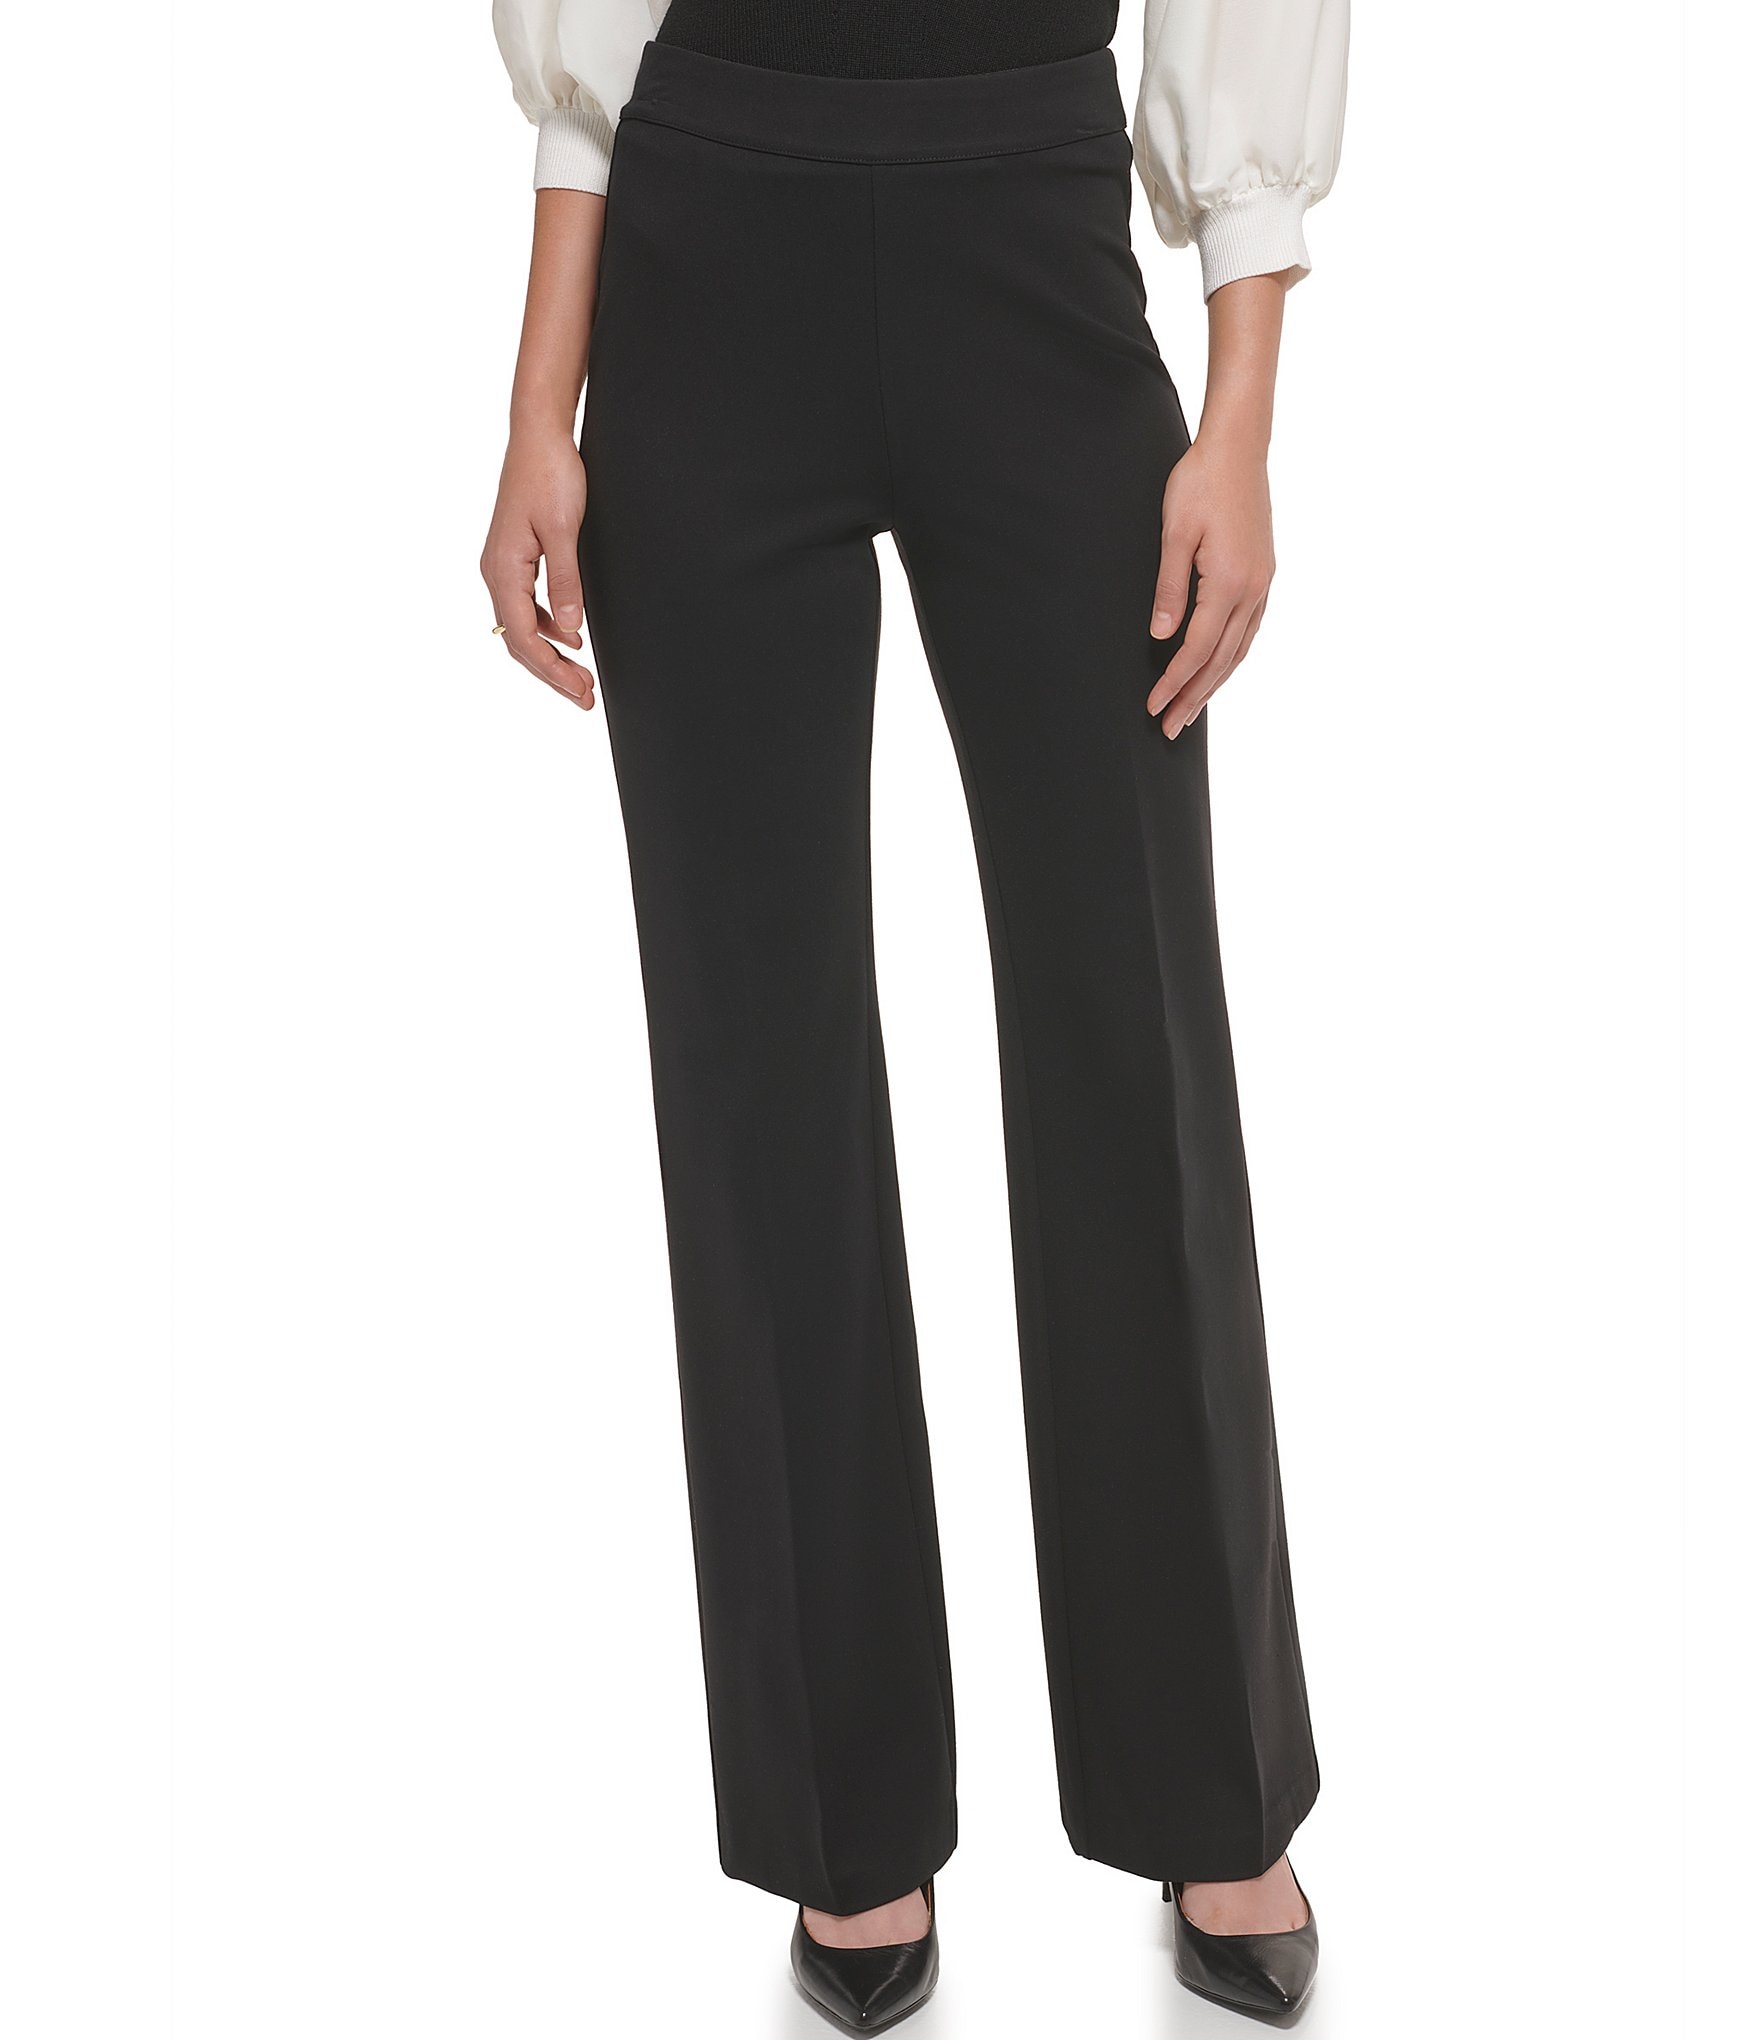 DKNY Women's Mid Rise Pull On Silhouette Ponte Pants Variety